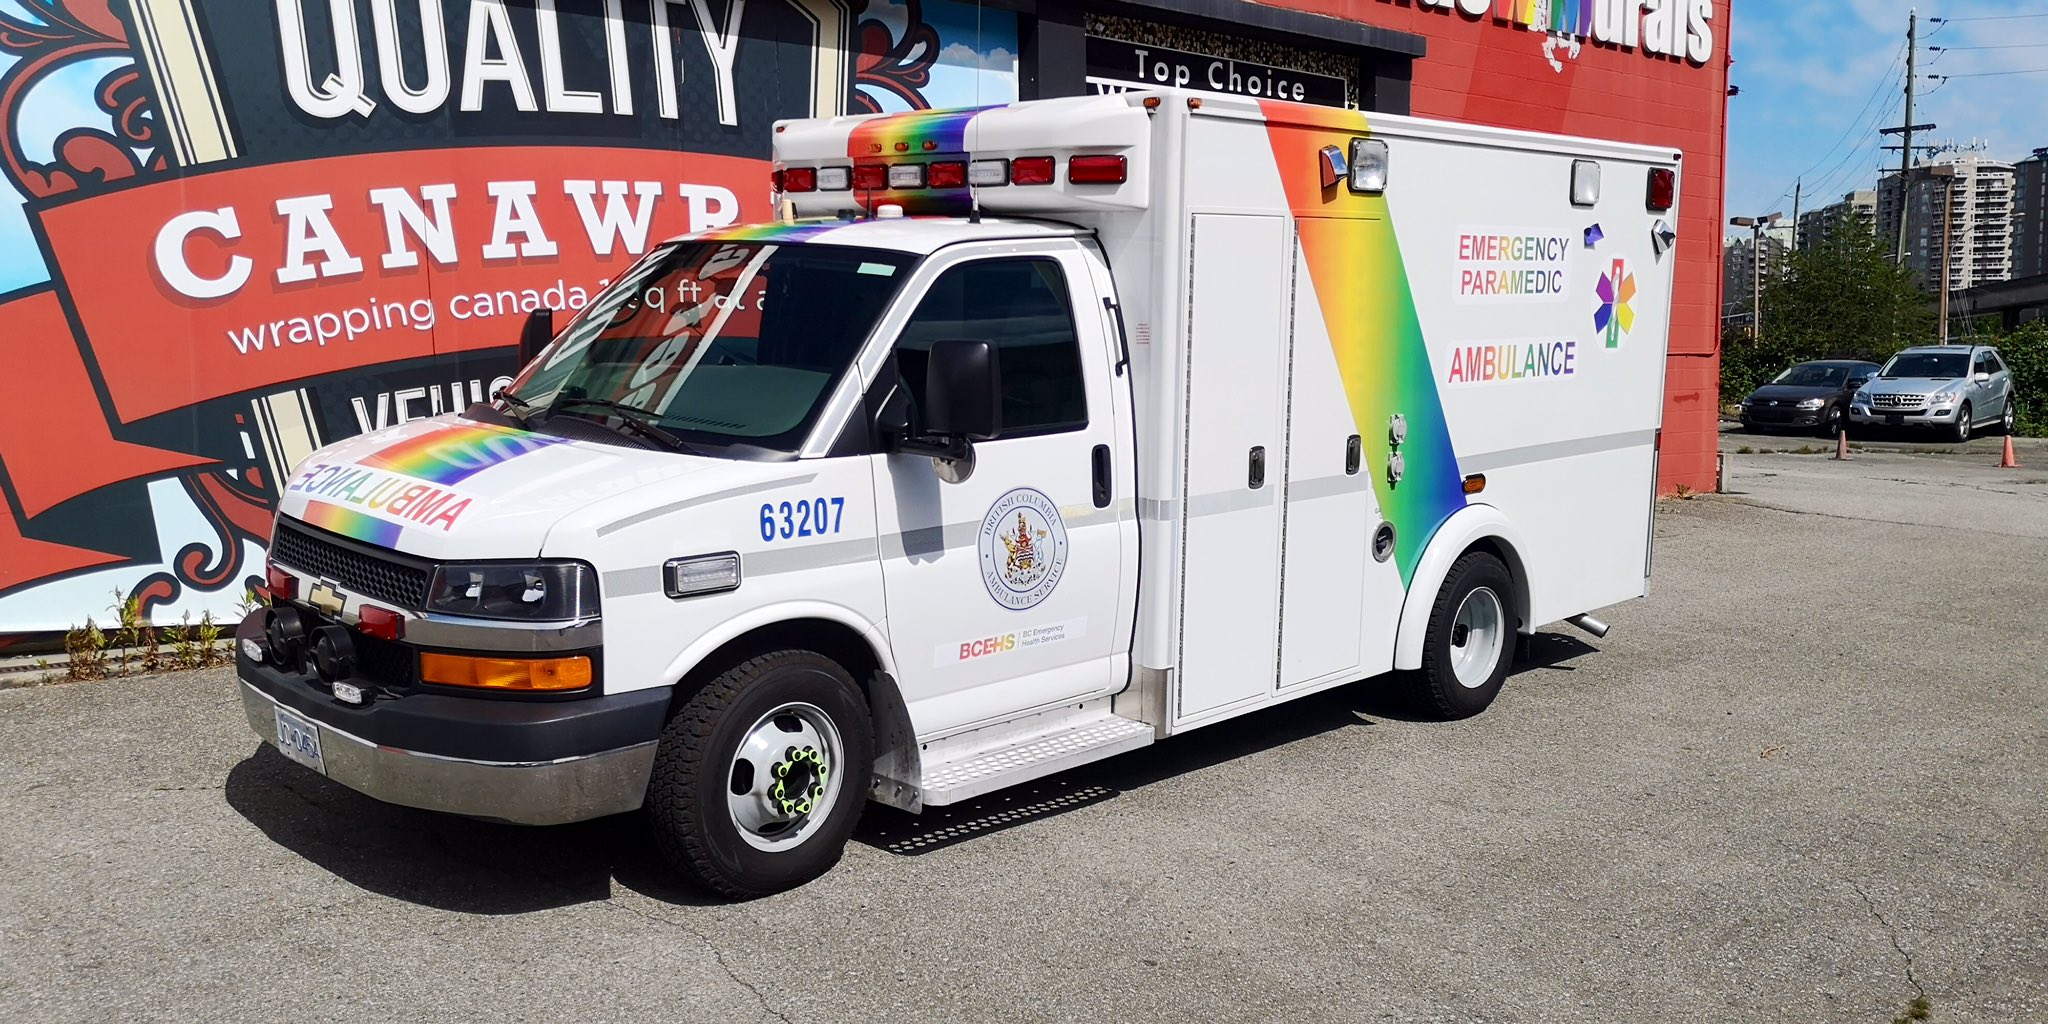 British Columbia Emergency Health Services' (BCEHS) Pride-themed ambulance parked in New Westminster in 2019 